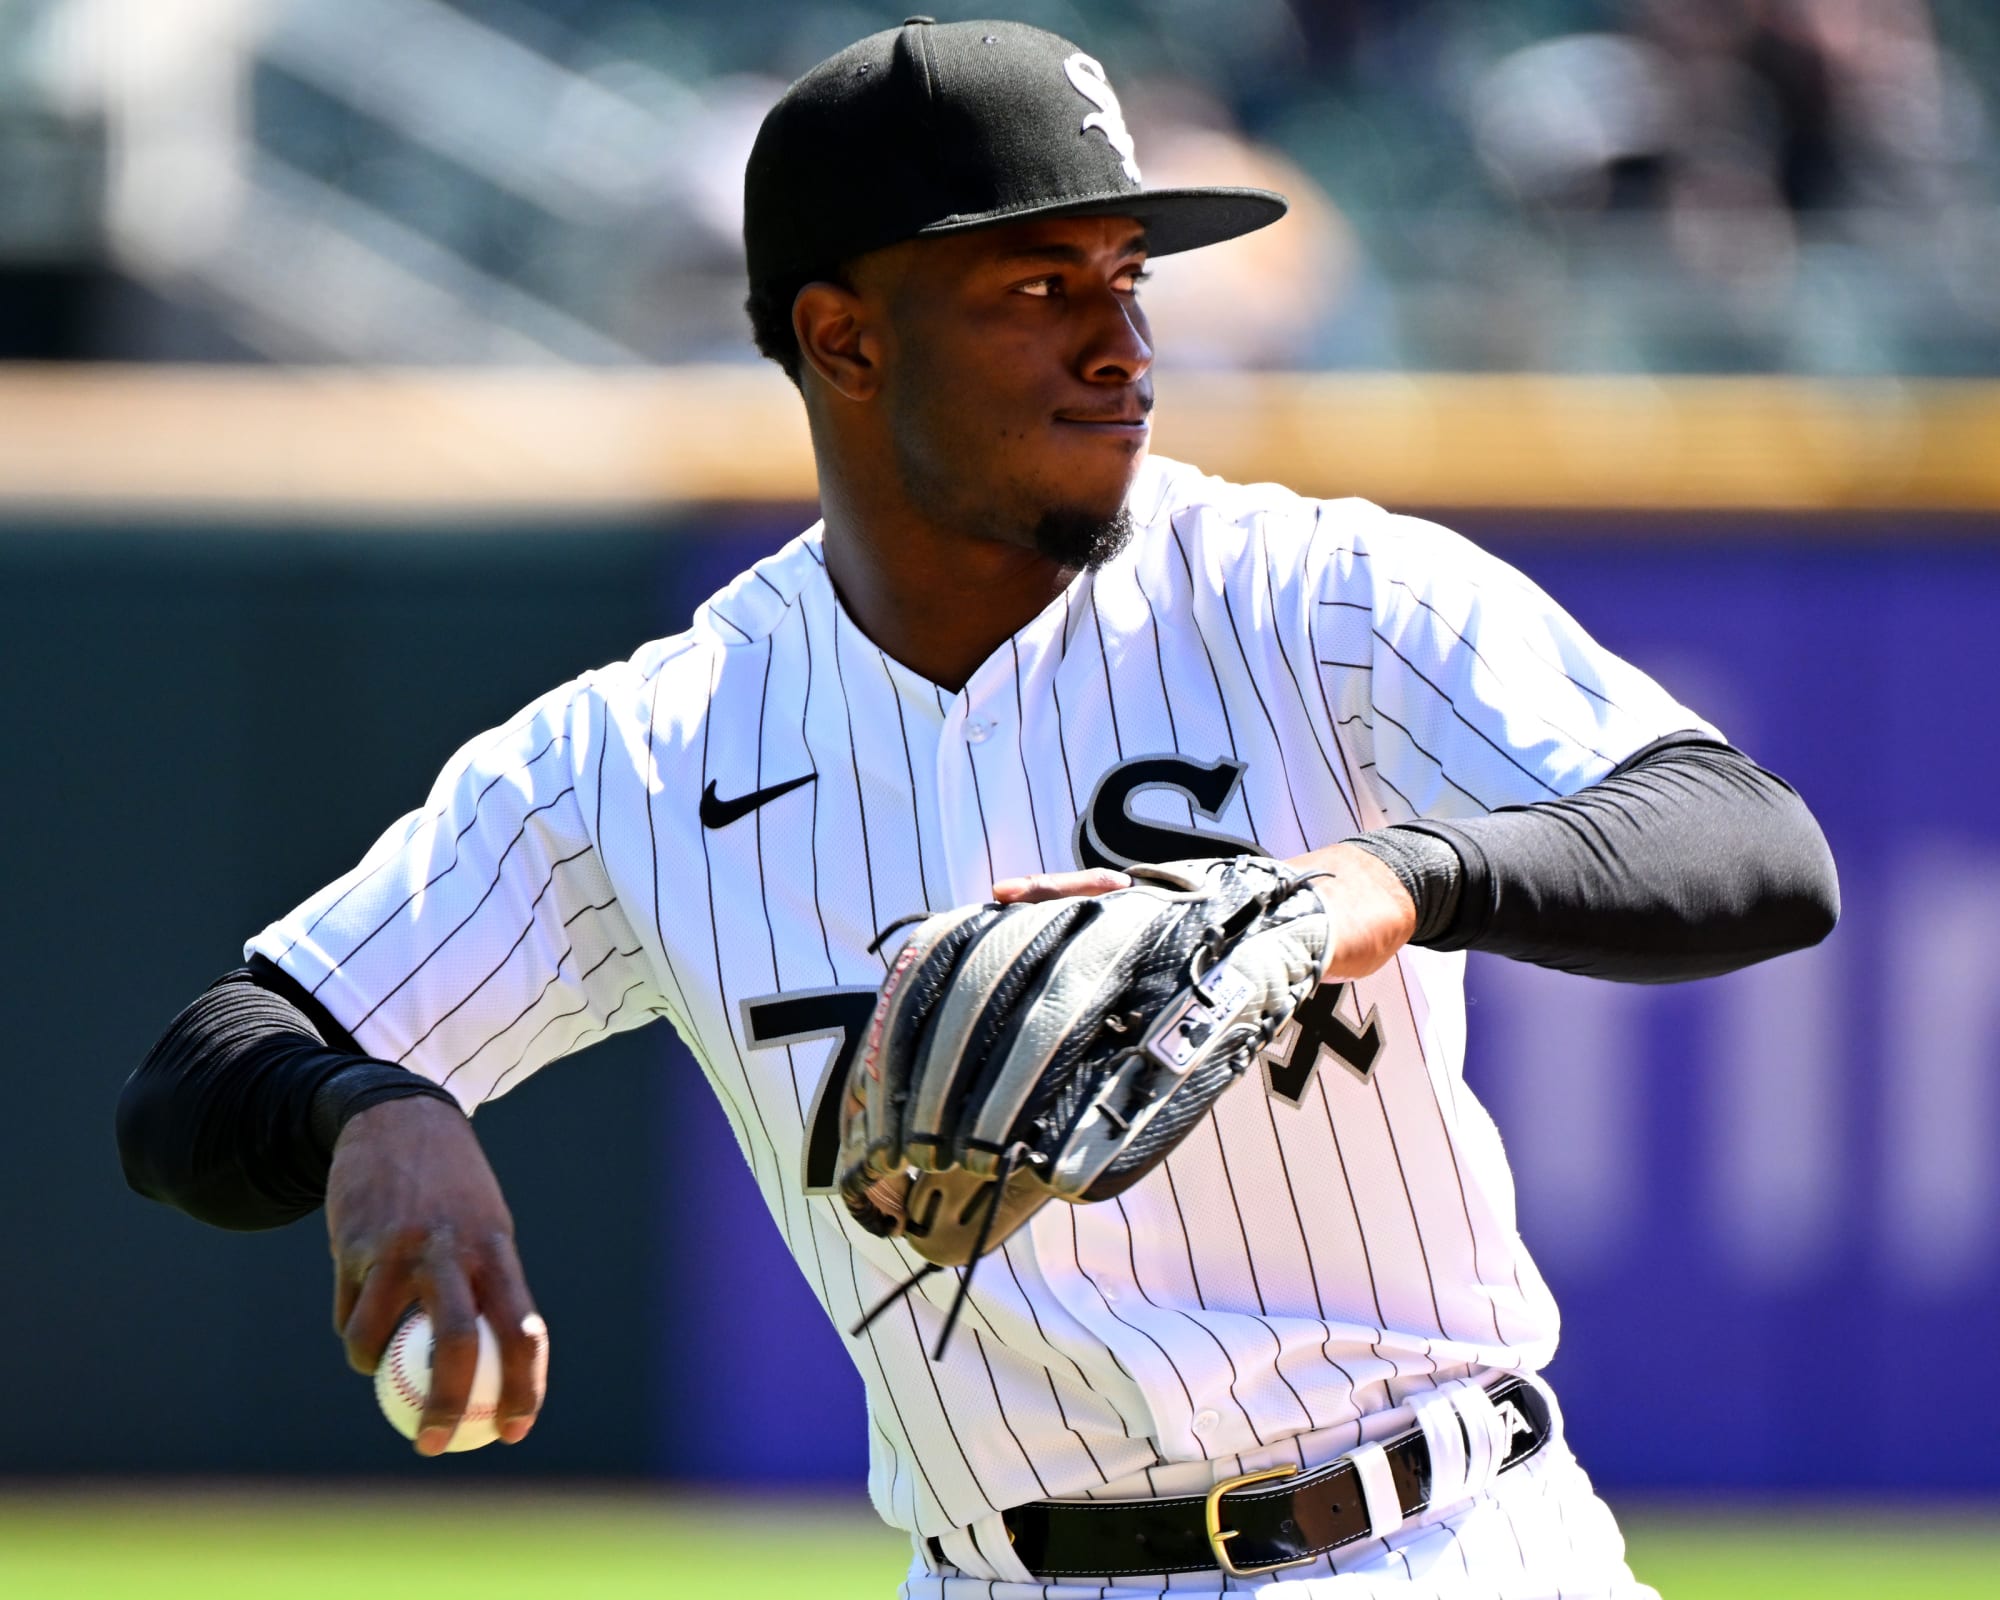 September 14, 2022 Chicago White Sox - Tim Anderson Pasta Party